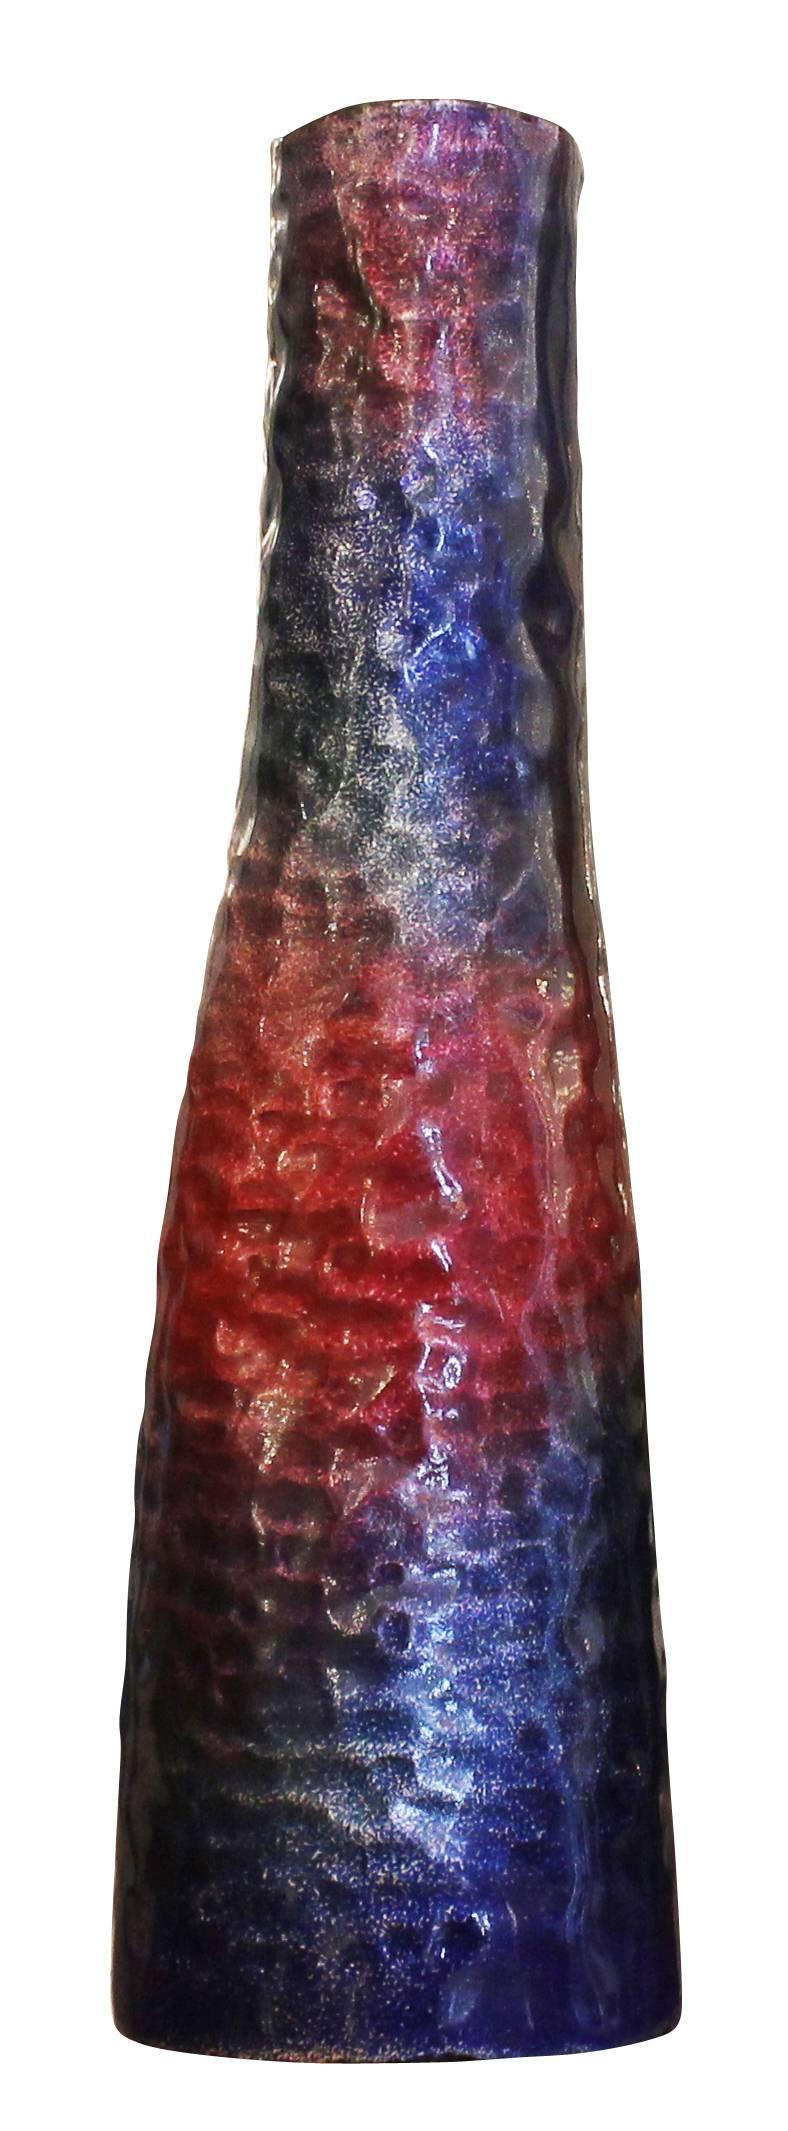 Colorful red, blue and purple enamel vase made by Paolo De Poli. Signed on the bottom.
